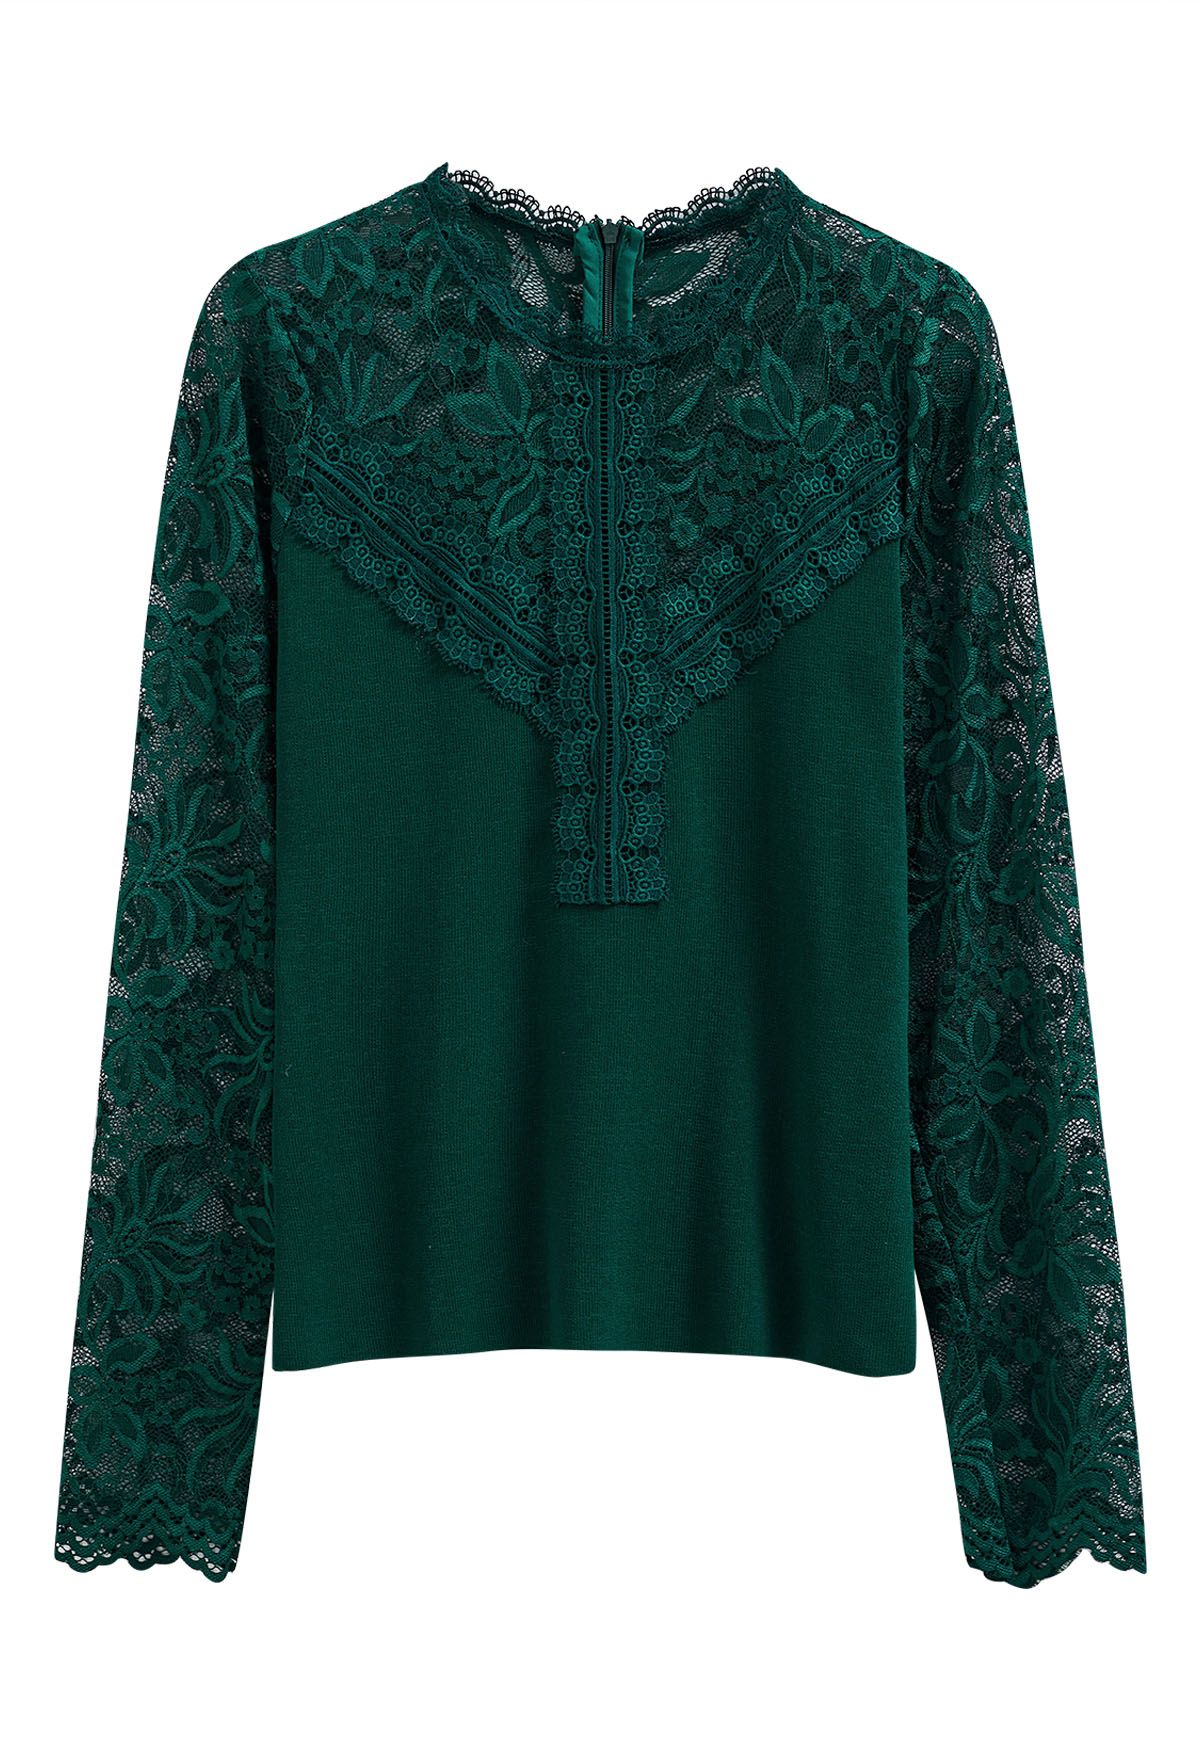 Ethereal Floral Lace Spliced Knit Top in Dark Green - Retro, Indie